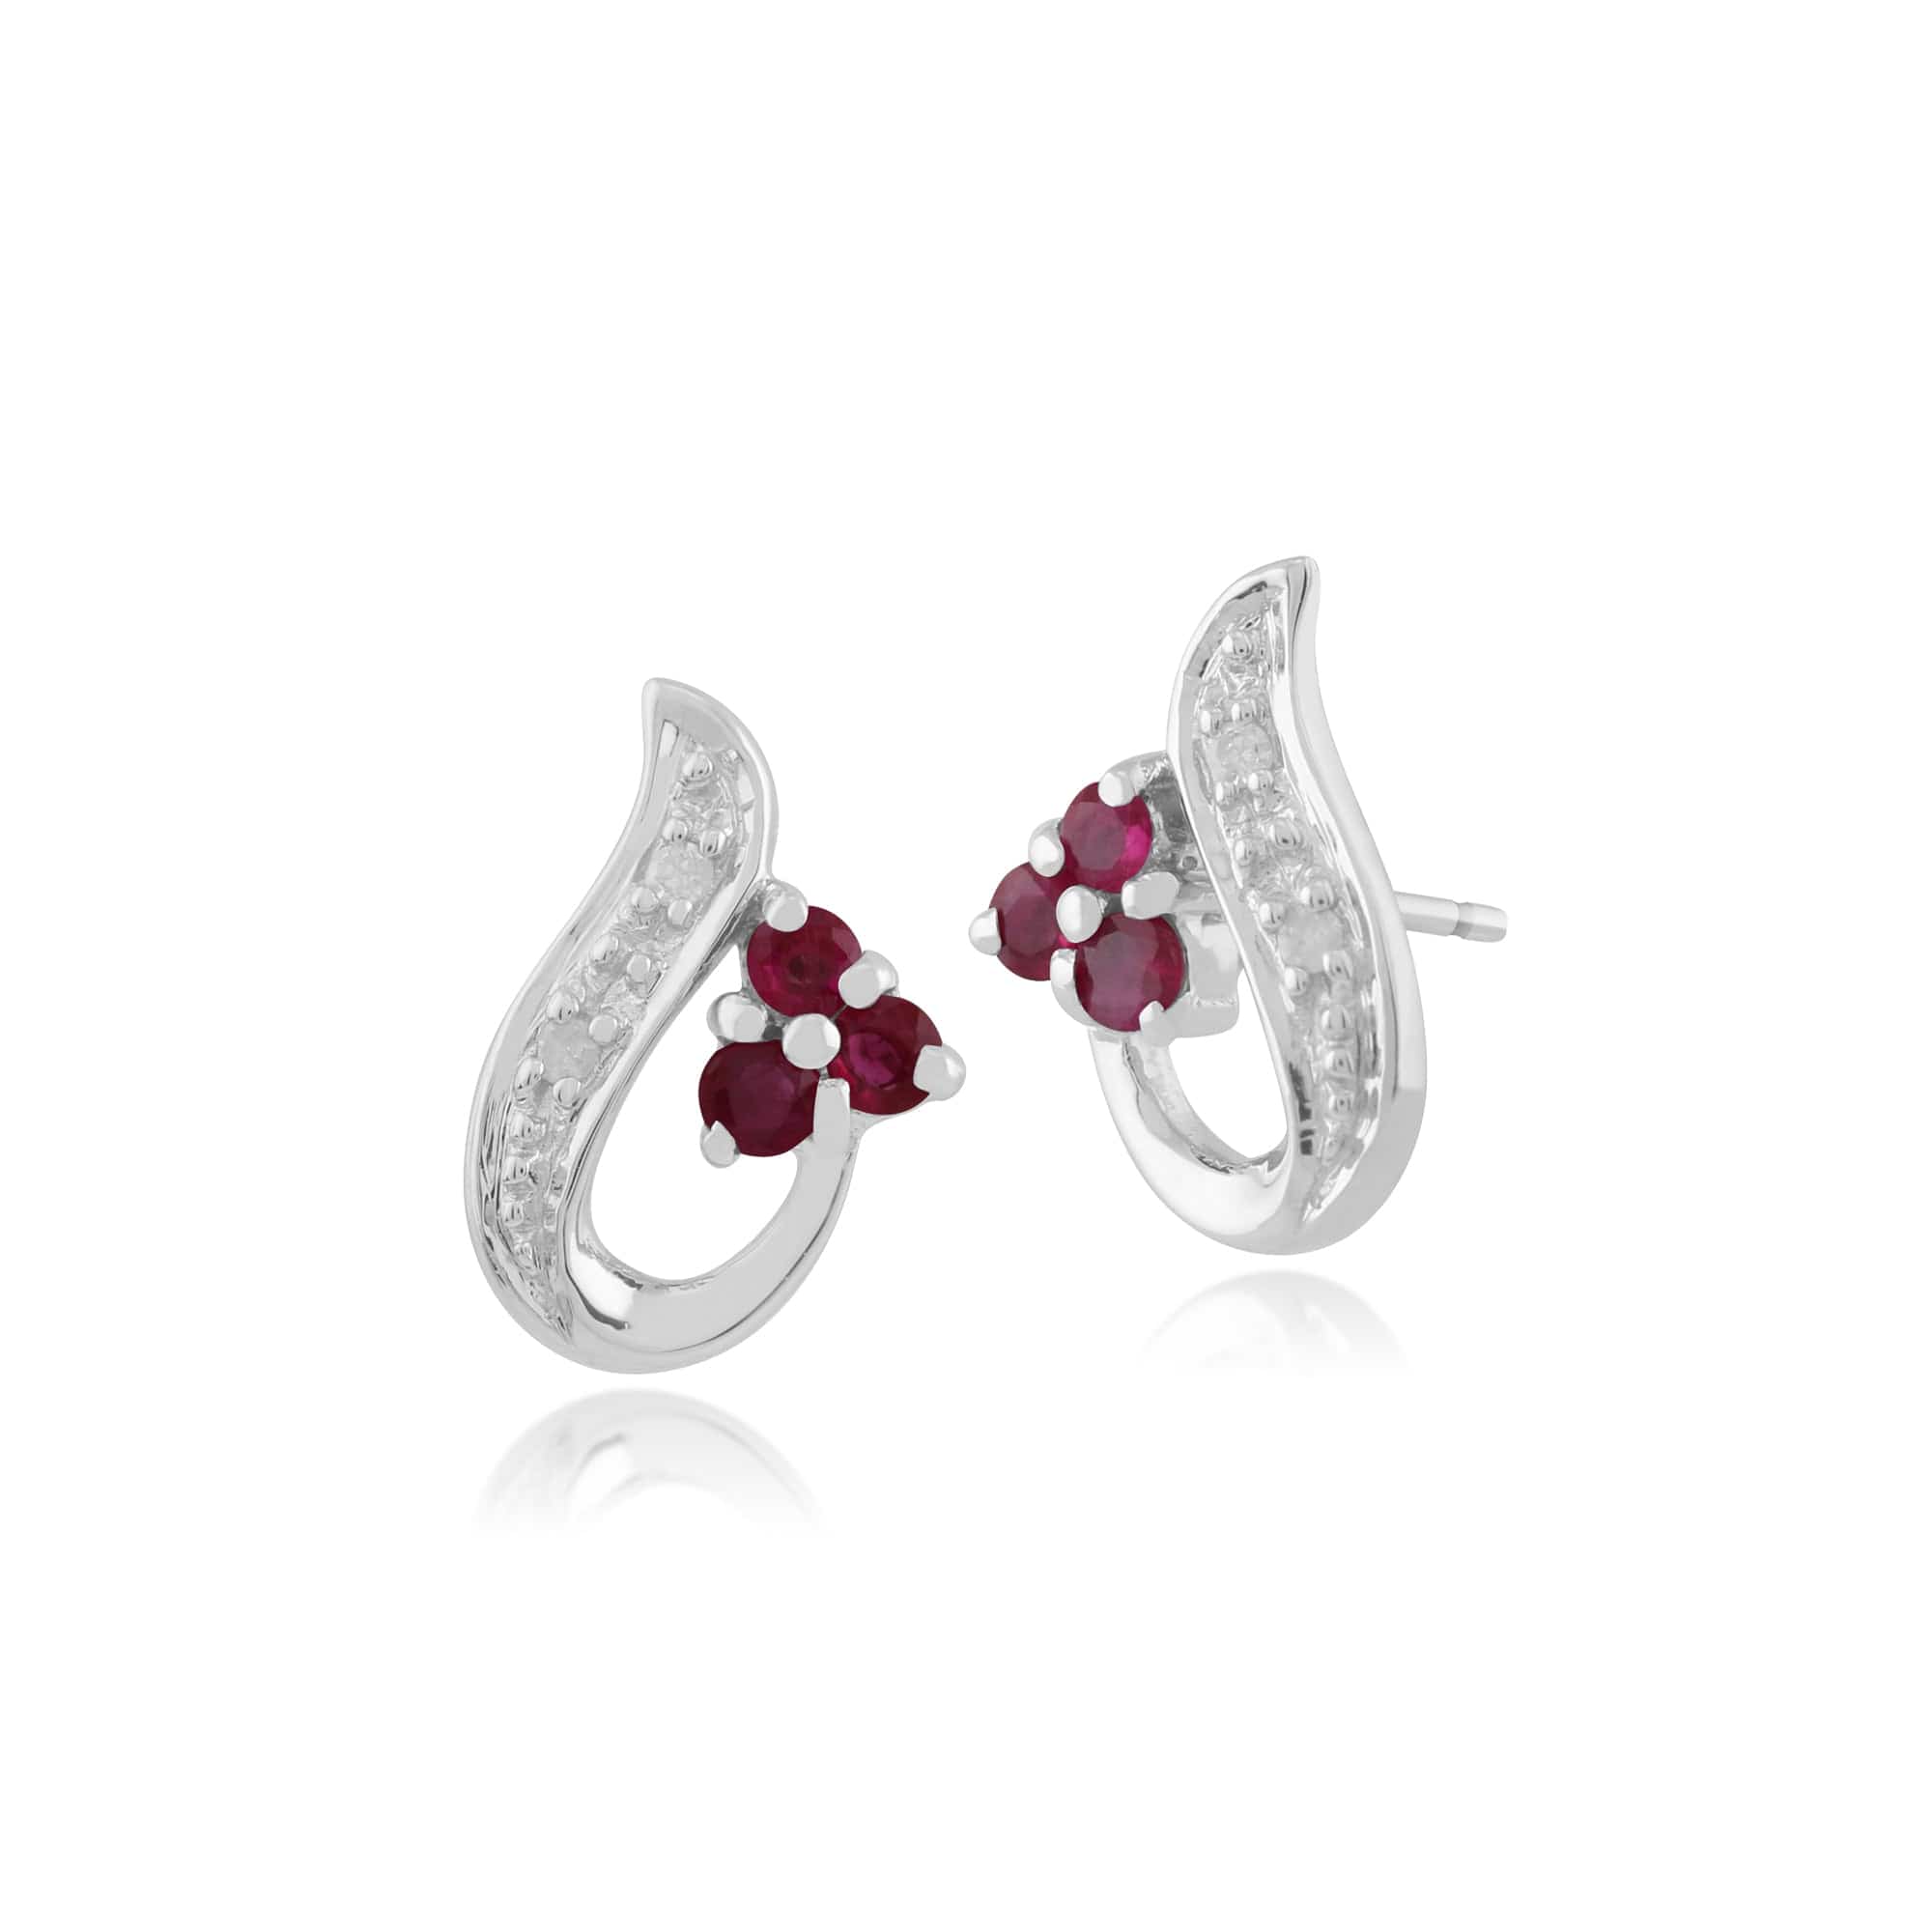 9ct White Gold 0.16ct Natural Ruby & 1.6pt Diamond Classic Stud Earrings Image